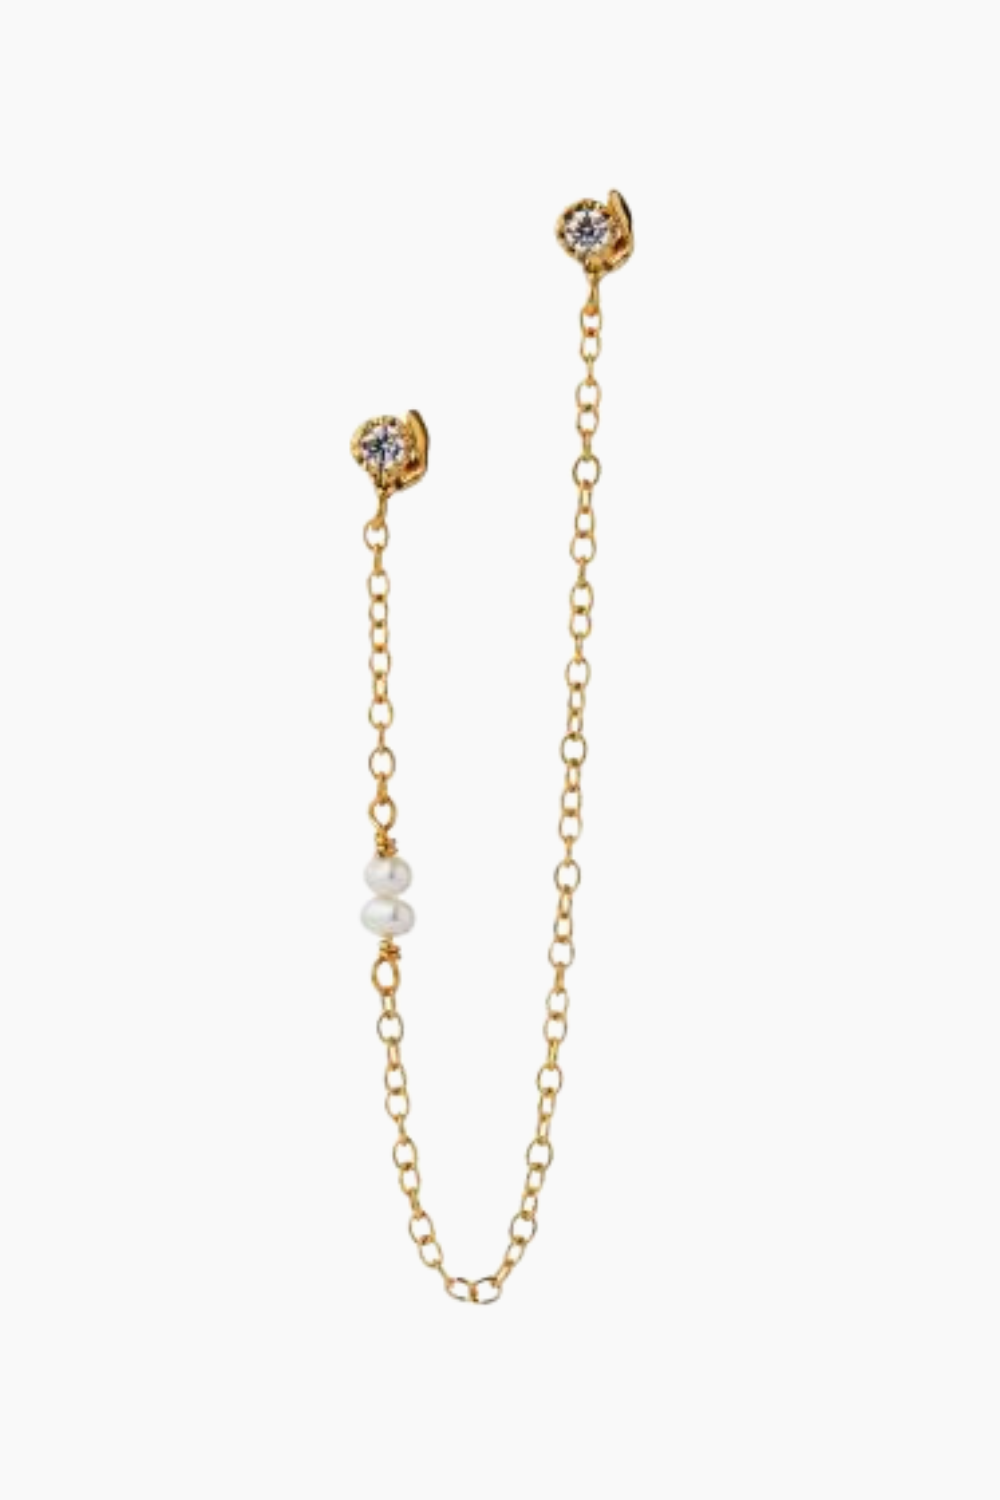 Twin Flow Earring with Stones, Chain & Pearls - Gold - Stine A